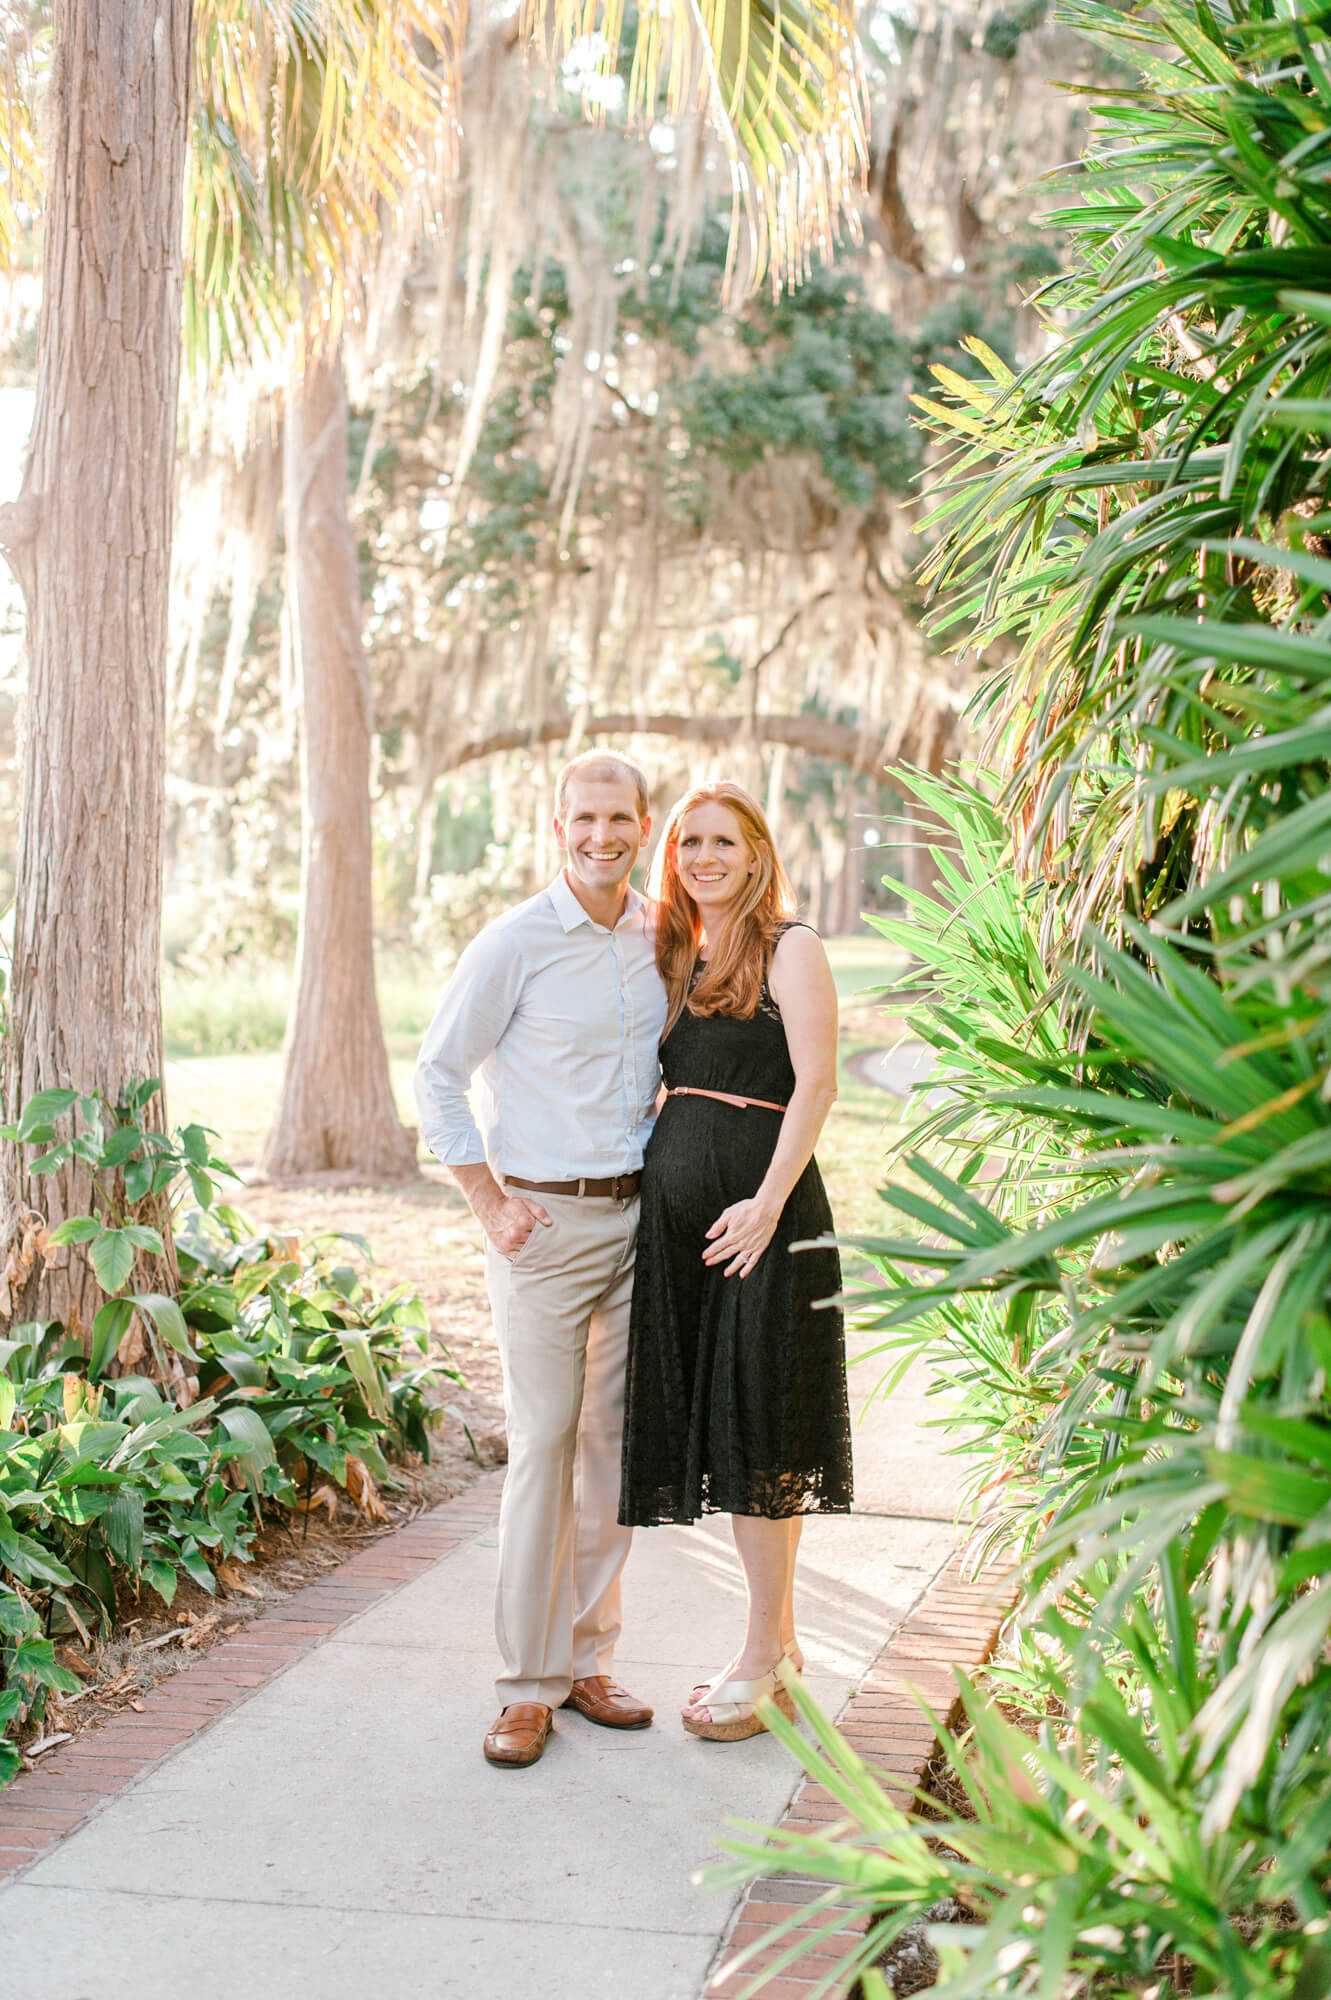 Mom and dad pose together holding belly on a path in the park. Baby boutiques in Orlando would be a great stop after their maternity photoshoot.